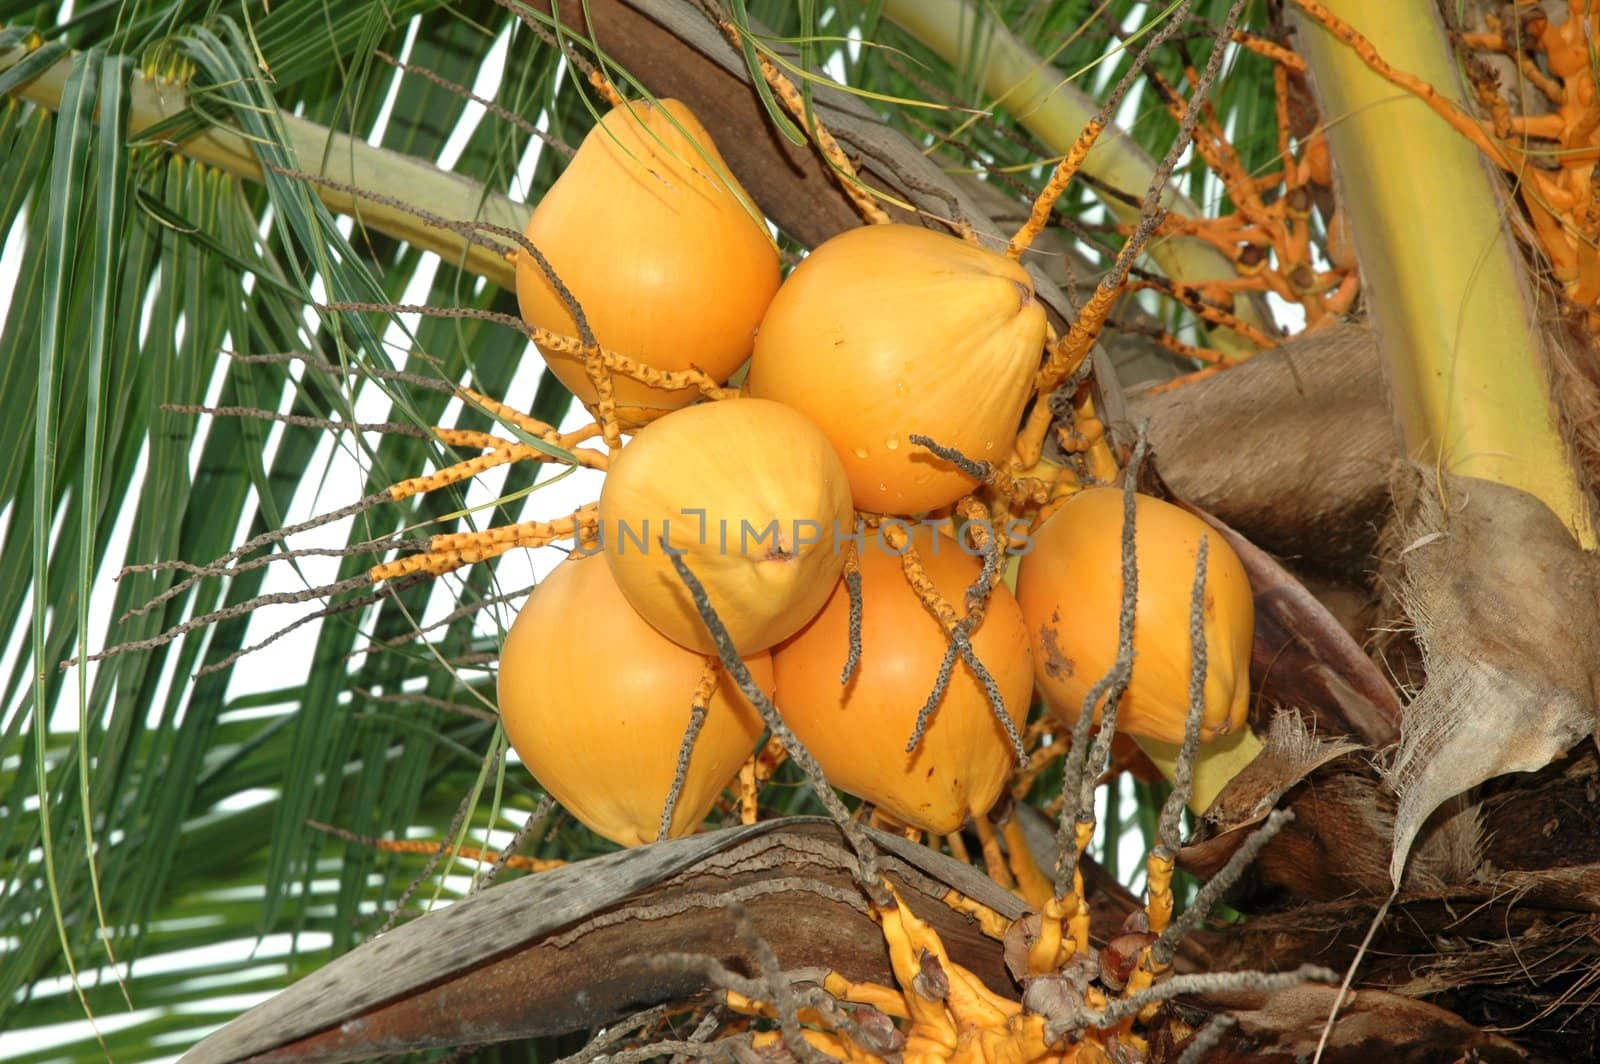 A bunch of ripe and fresh coconut palm on tree Cocos nucifera